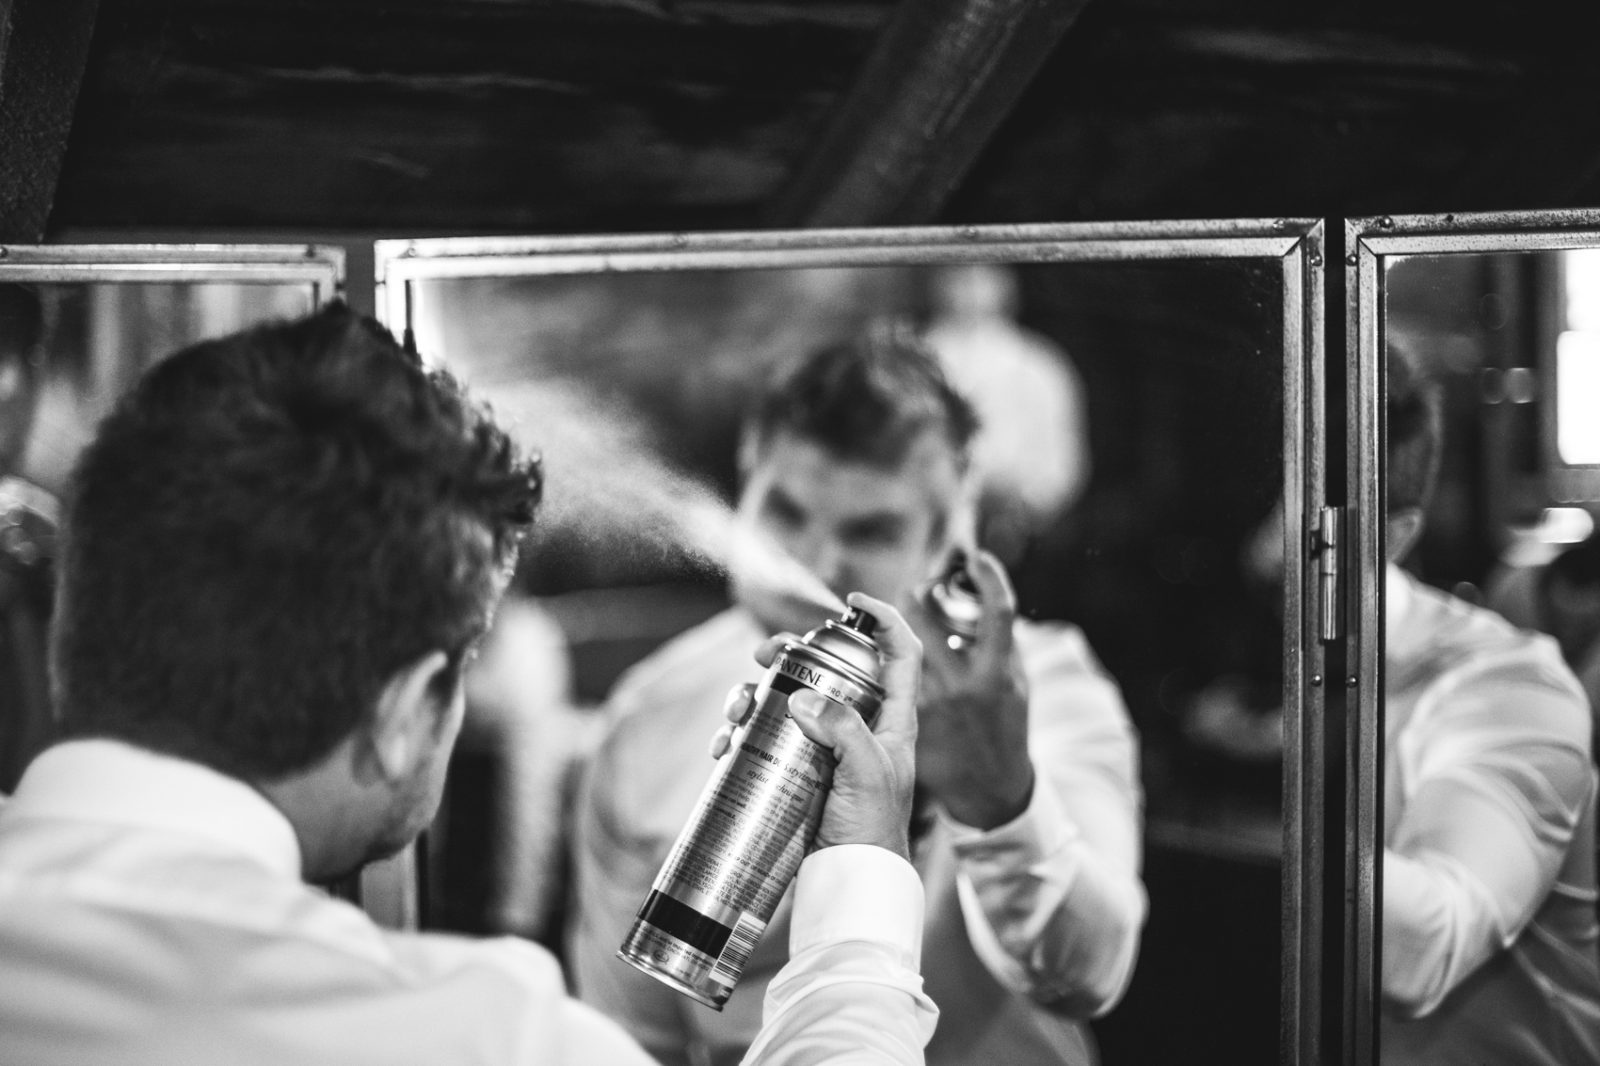 groom getting ready for wedding spraying hairspray in black and white